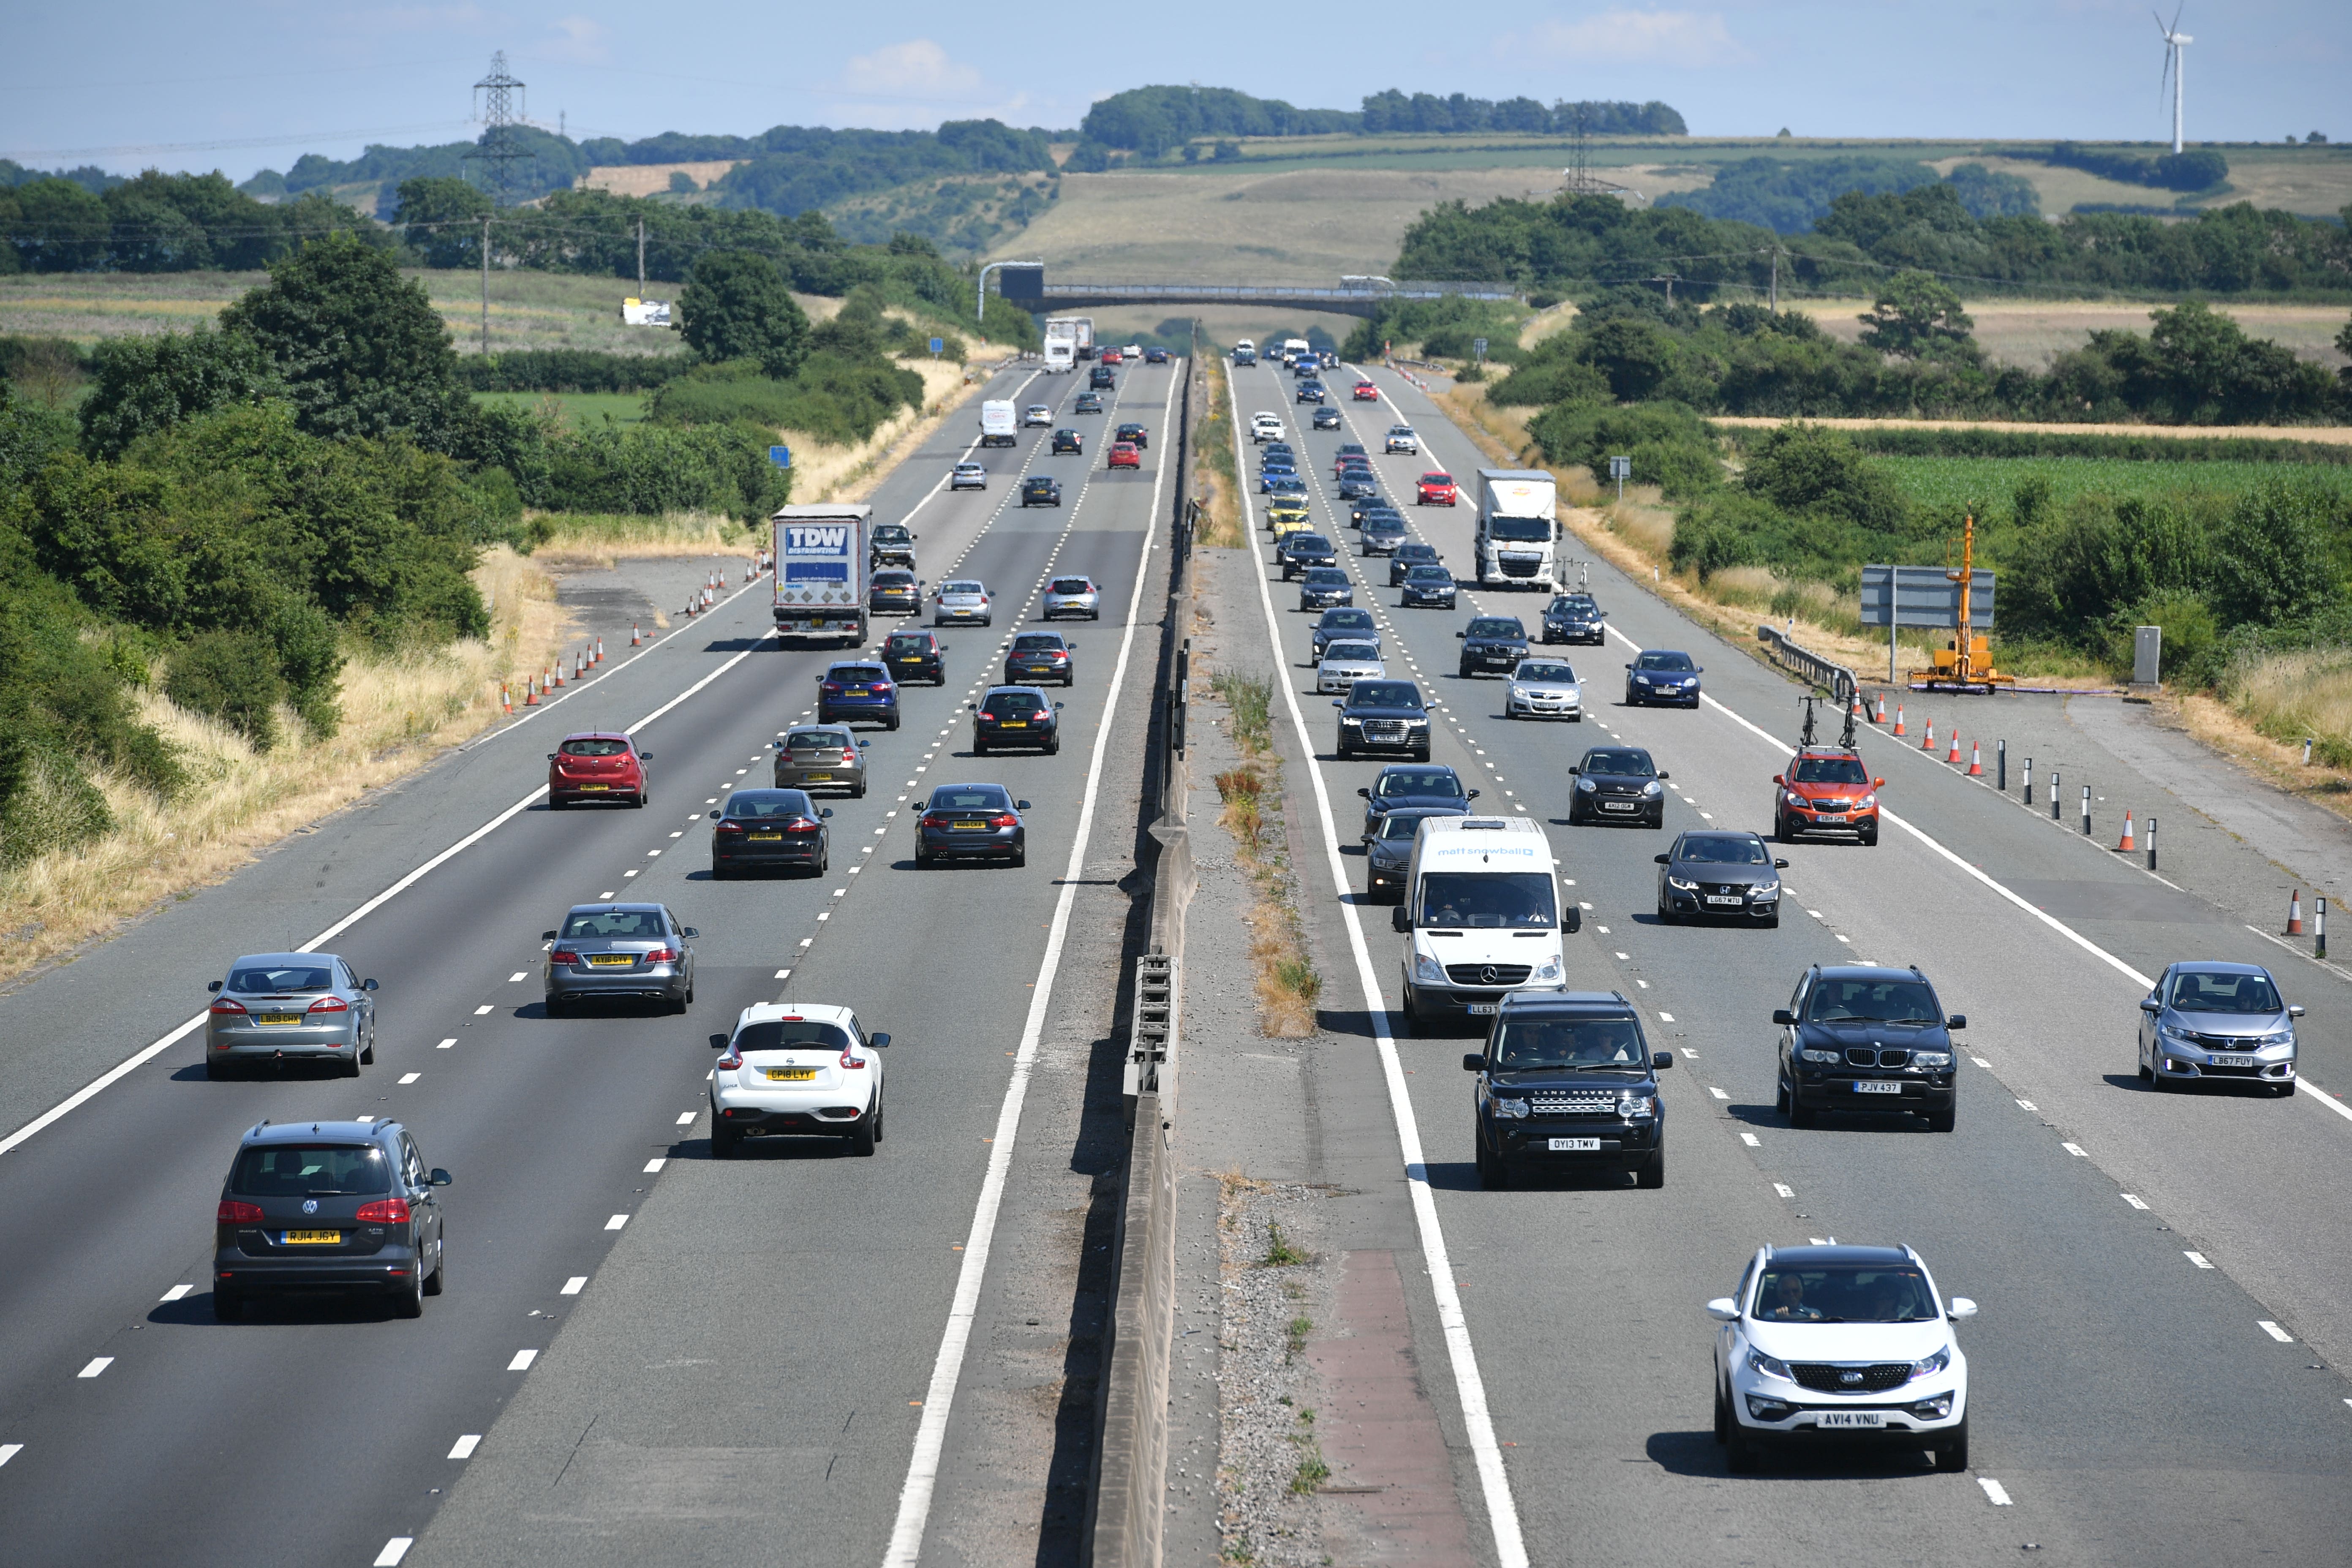 Hitting the road: Plan ahead before trips this bank holiday weekend